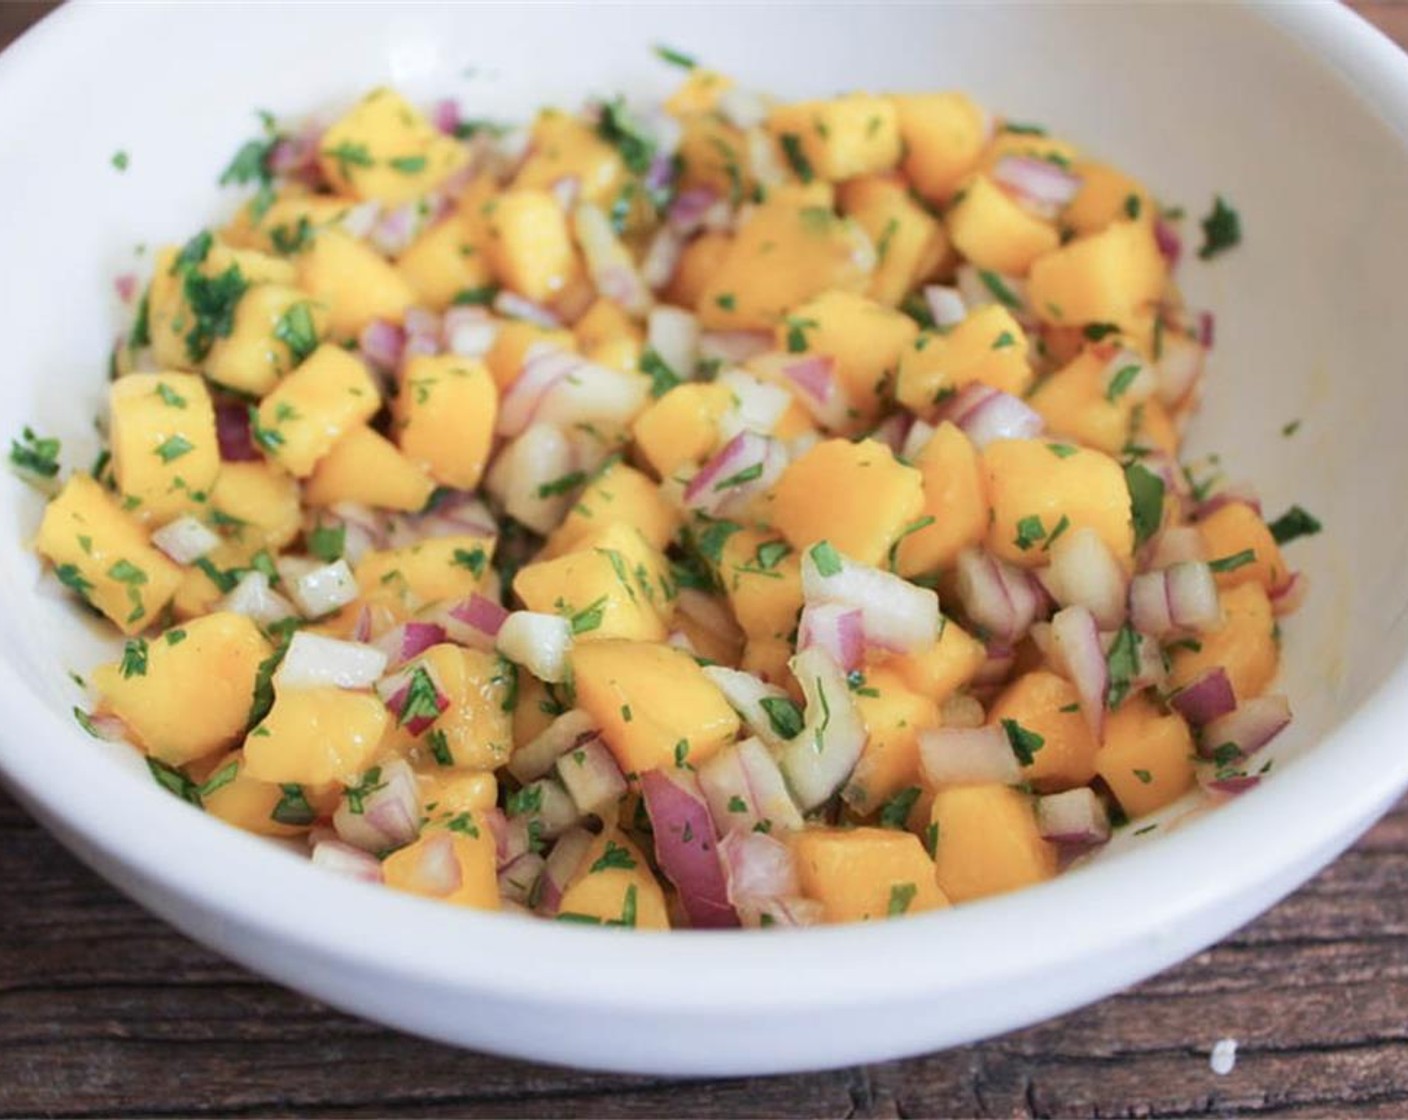 step 2 Start by preparing the mango salsa. In a medium bowl, combine Mango (1), Red Onion (1/2 cup), Fresh Cilantro (2 Tbsp), Lime (1). Let sit at room temperature for 30 minutes.